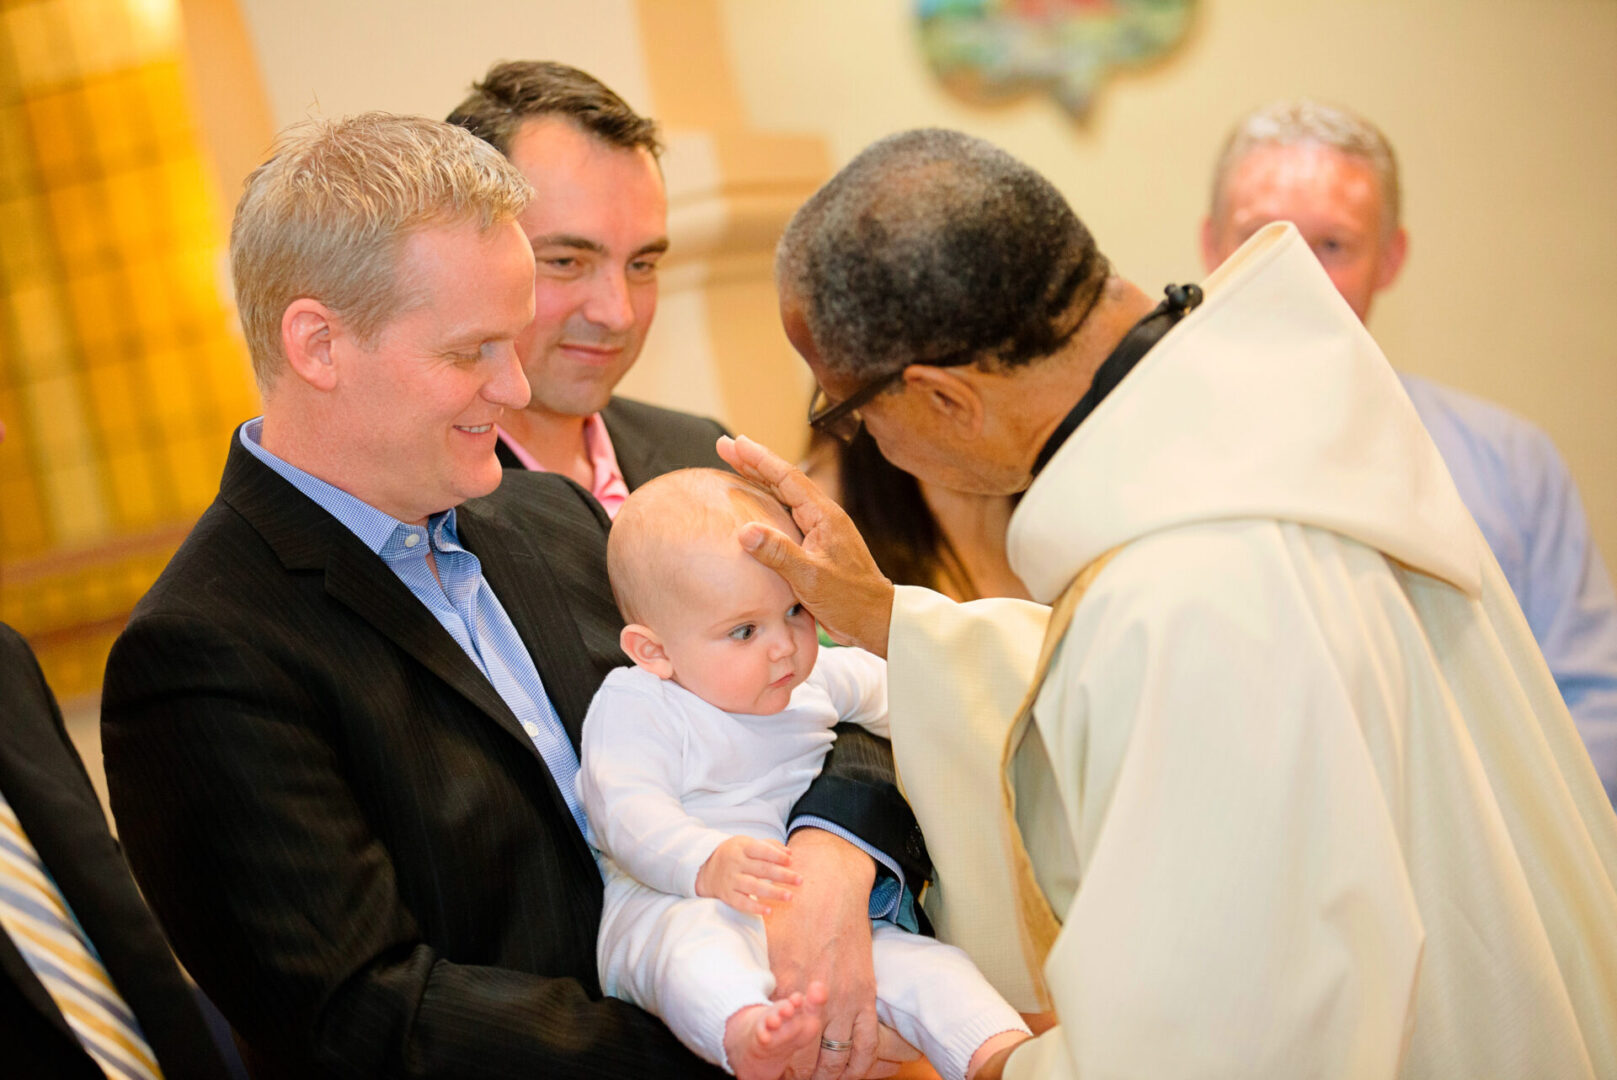 A priest touching a baby